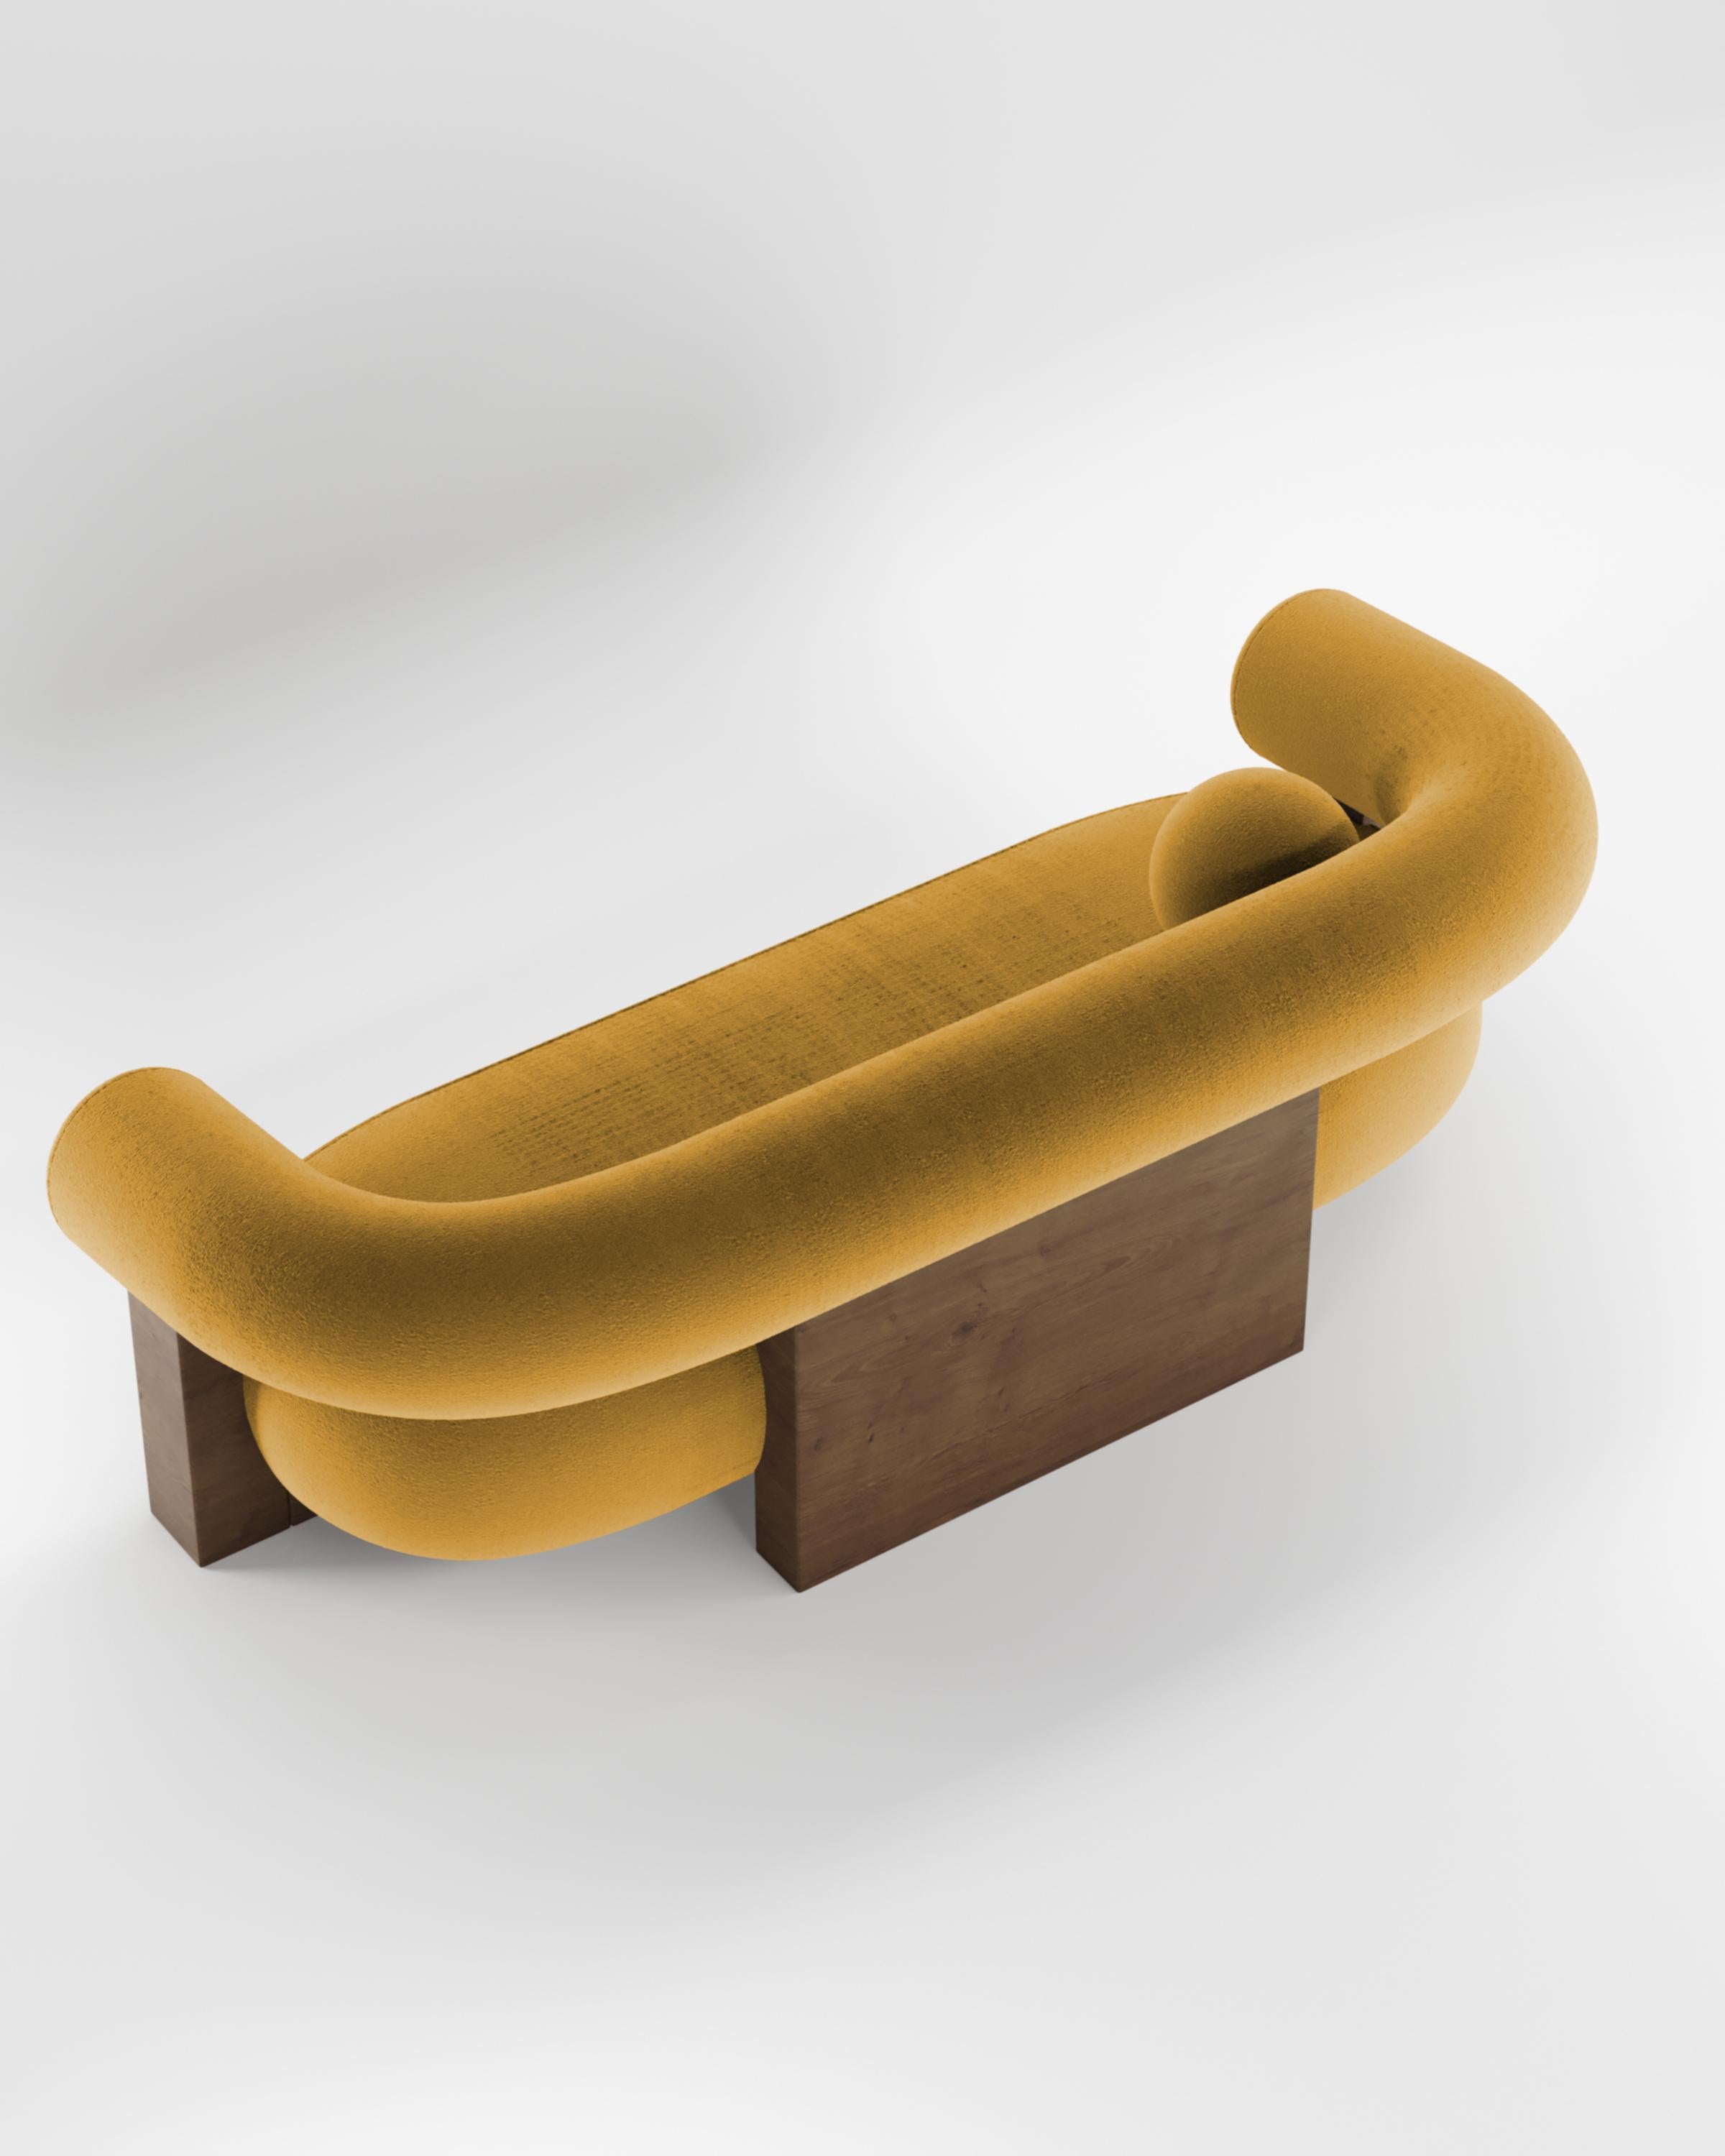 Fabric Contemporary Modern Cassete Sofa in bouclé Mustard & Wood by Collector Studio For Sale